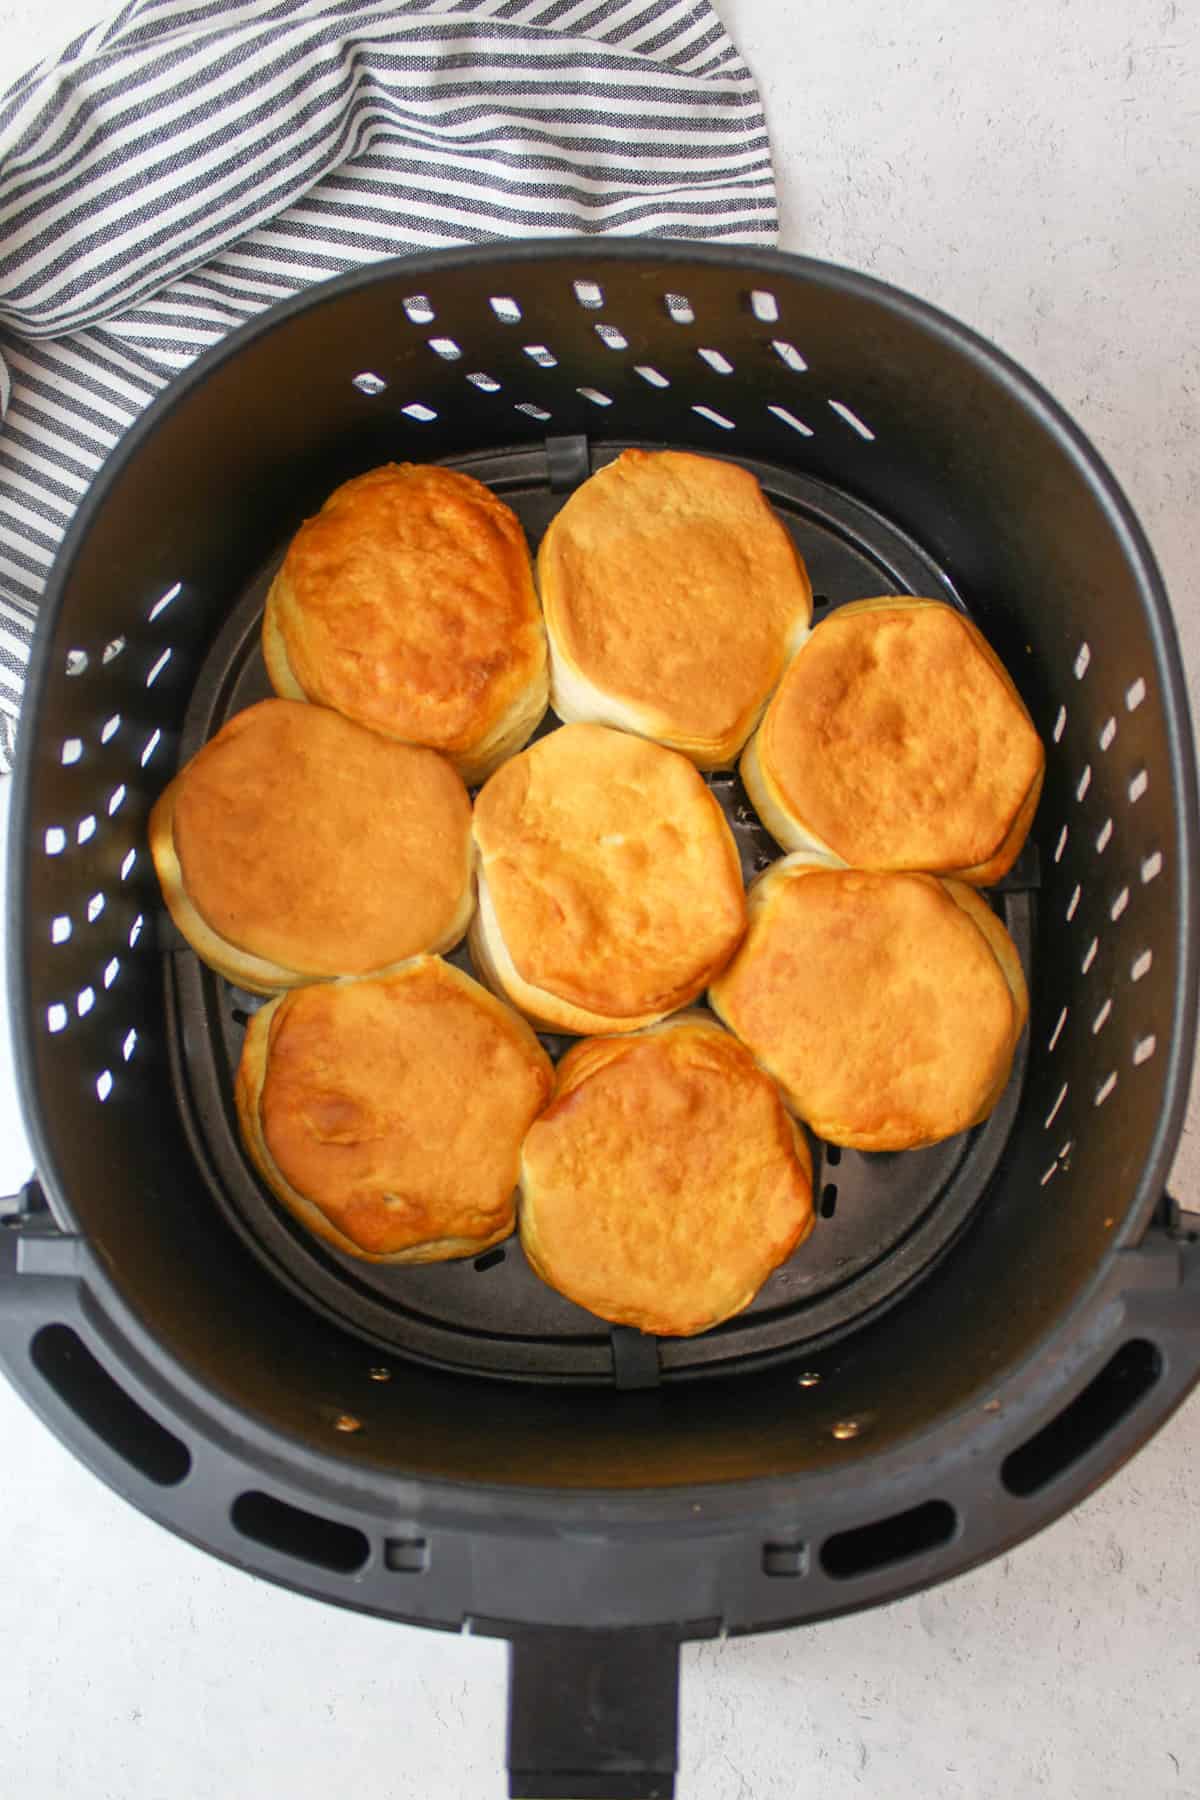 Can You Put Parchment Paper In The Air Fryer?